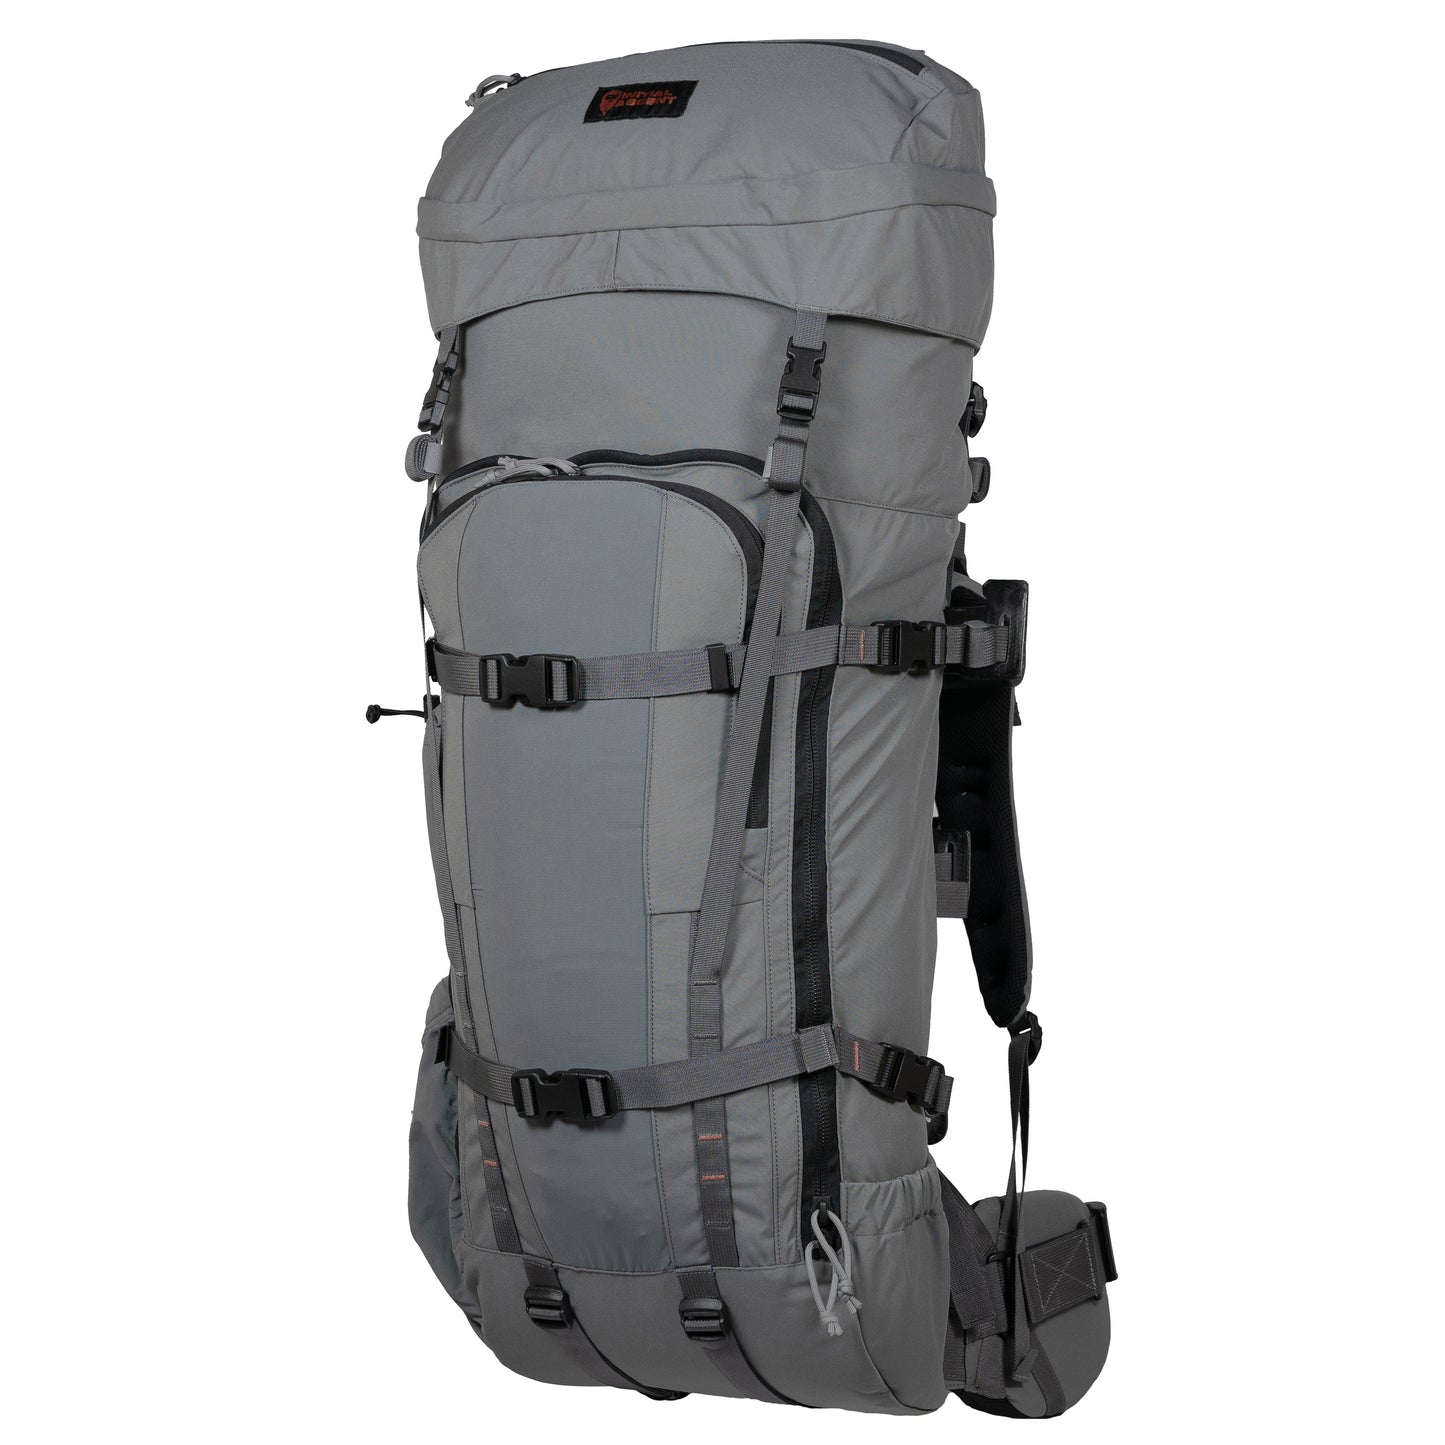 IA5K Pack System 2024